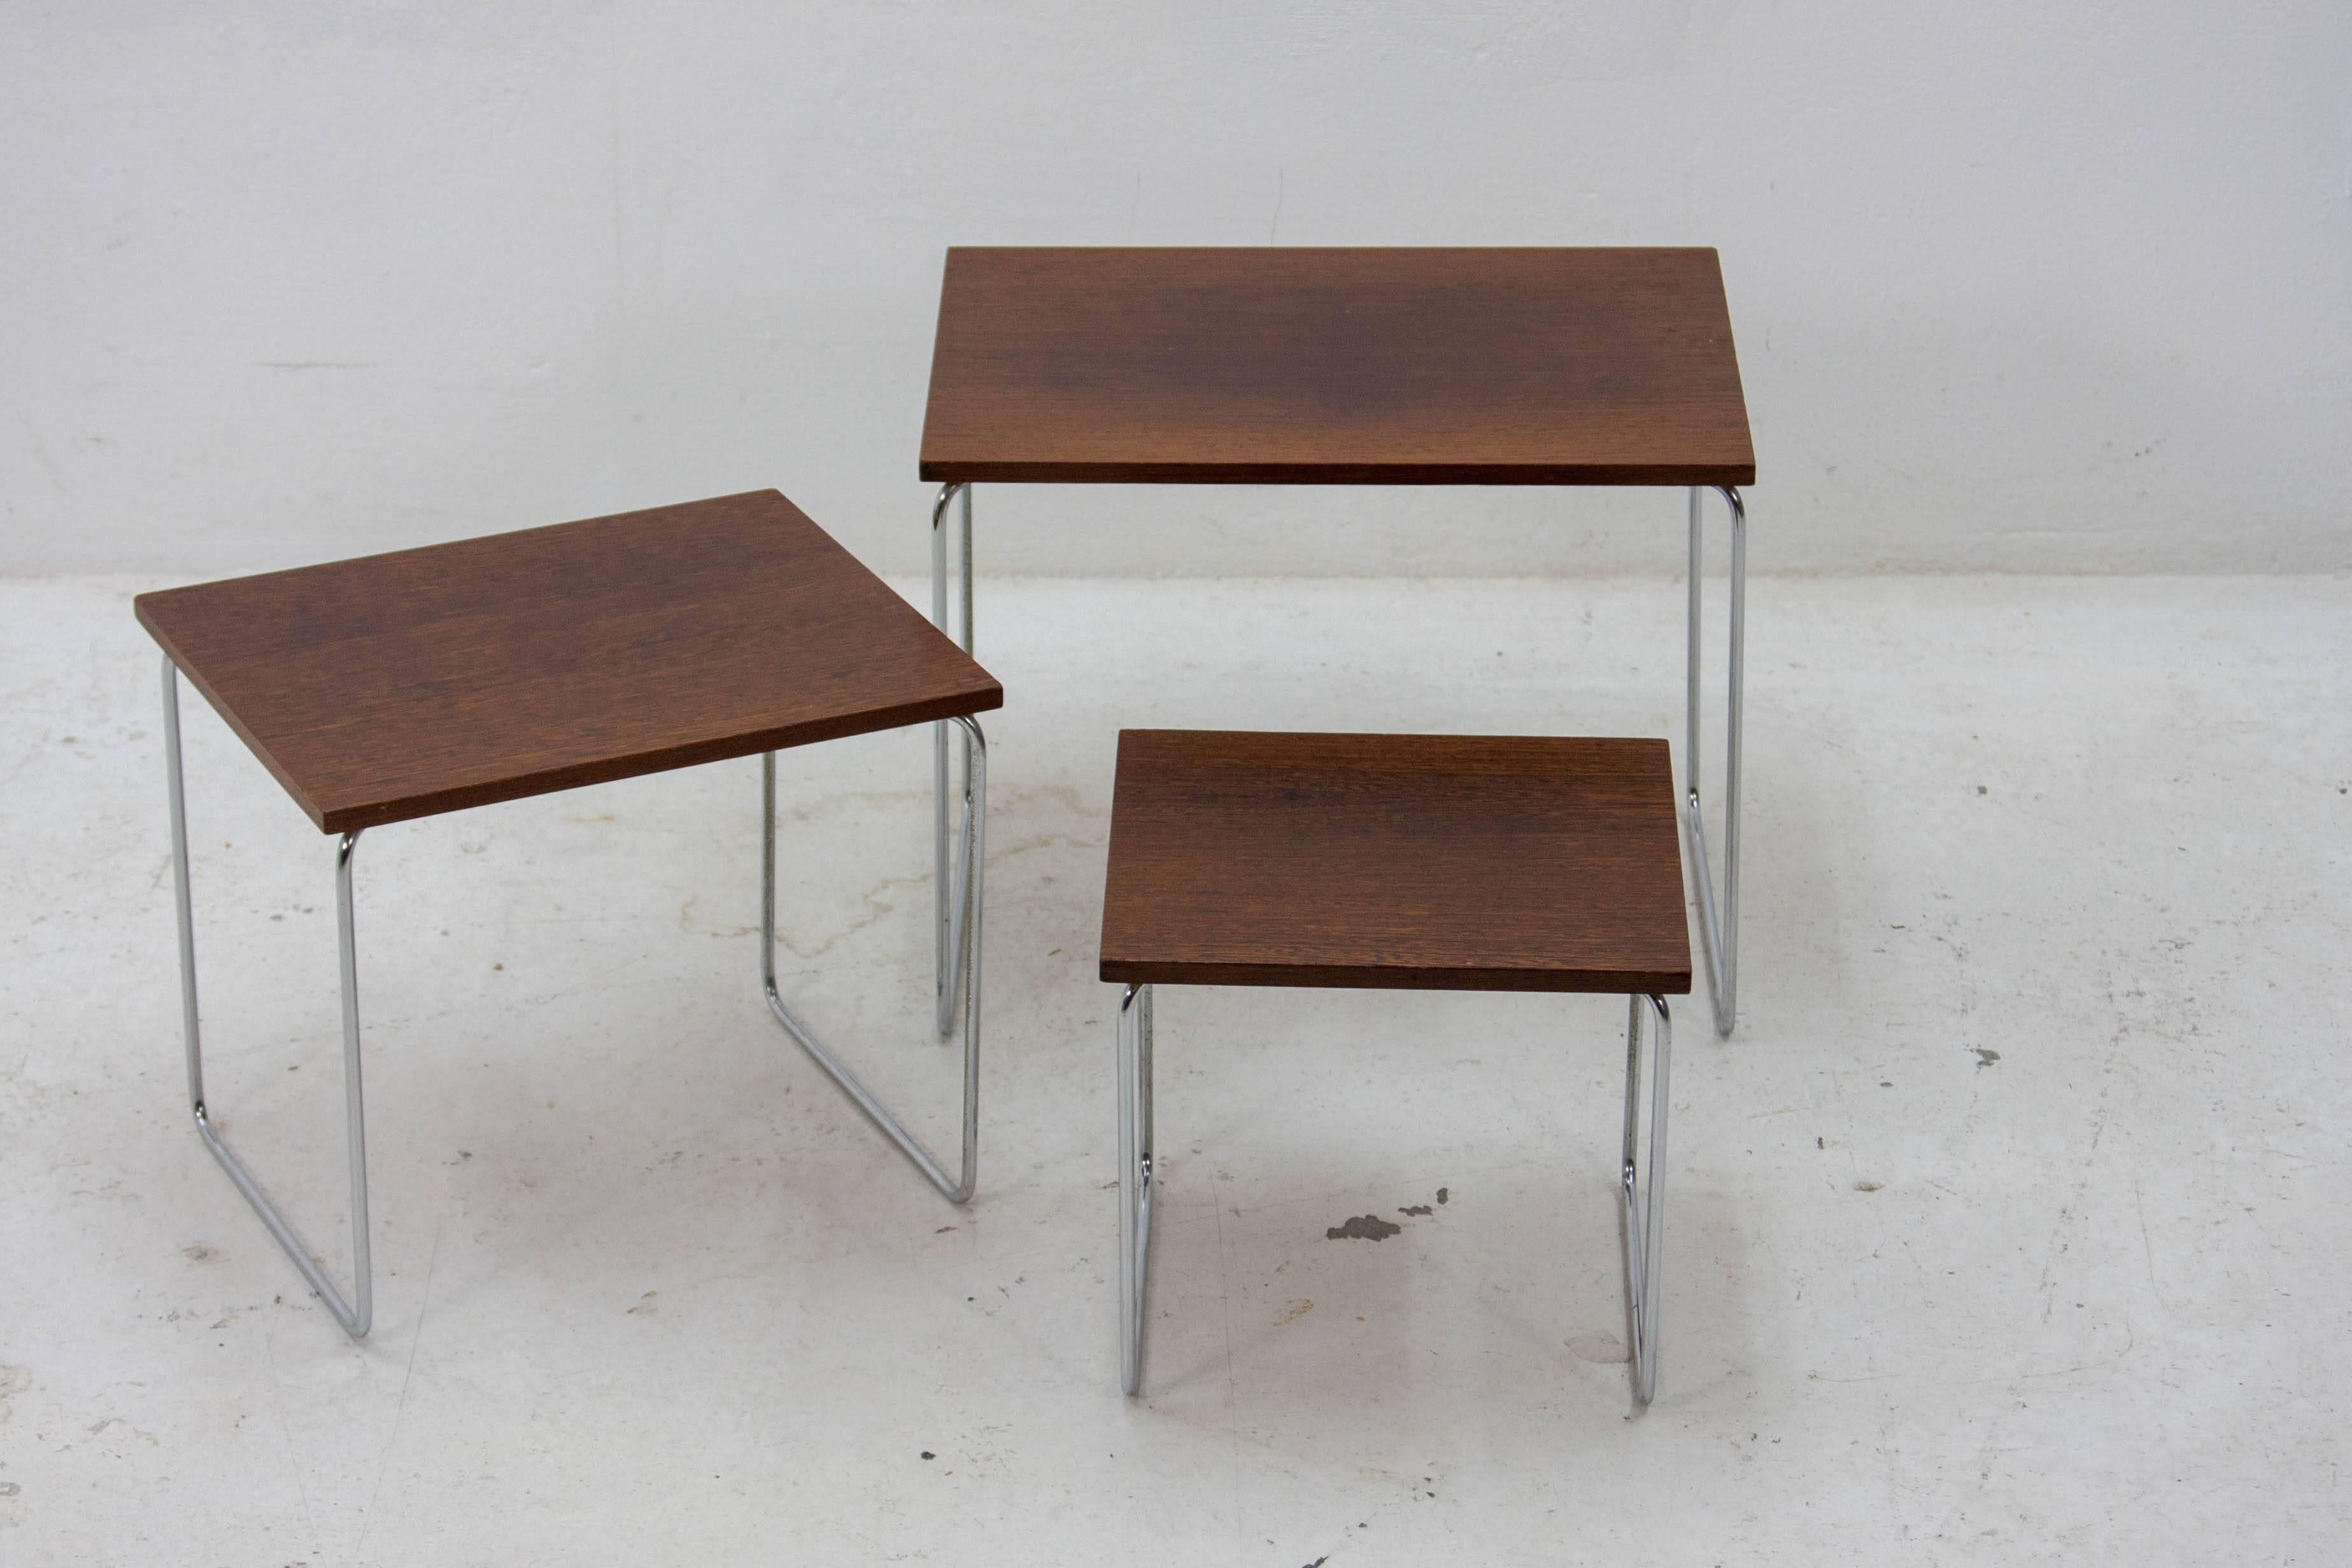 Set of three elegant Brabantia nesting tables in rosewood and chrome, 1960s.

Measurements:

Large table - Height 39 cm x Width 50 cm x Depth 30 cm. 
Middle table - Height 34 cm x Width 43 cm x Depth 30 cm. 
Small table - Height 29 cm x Width